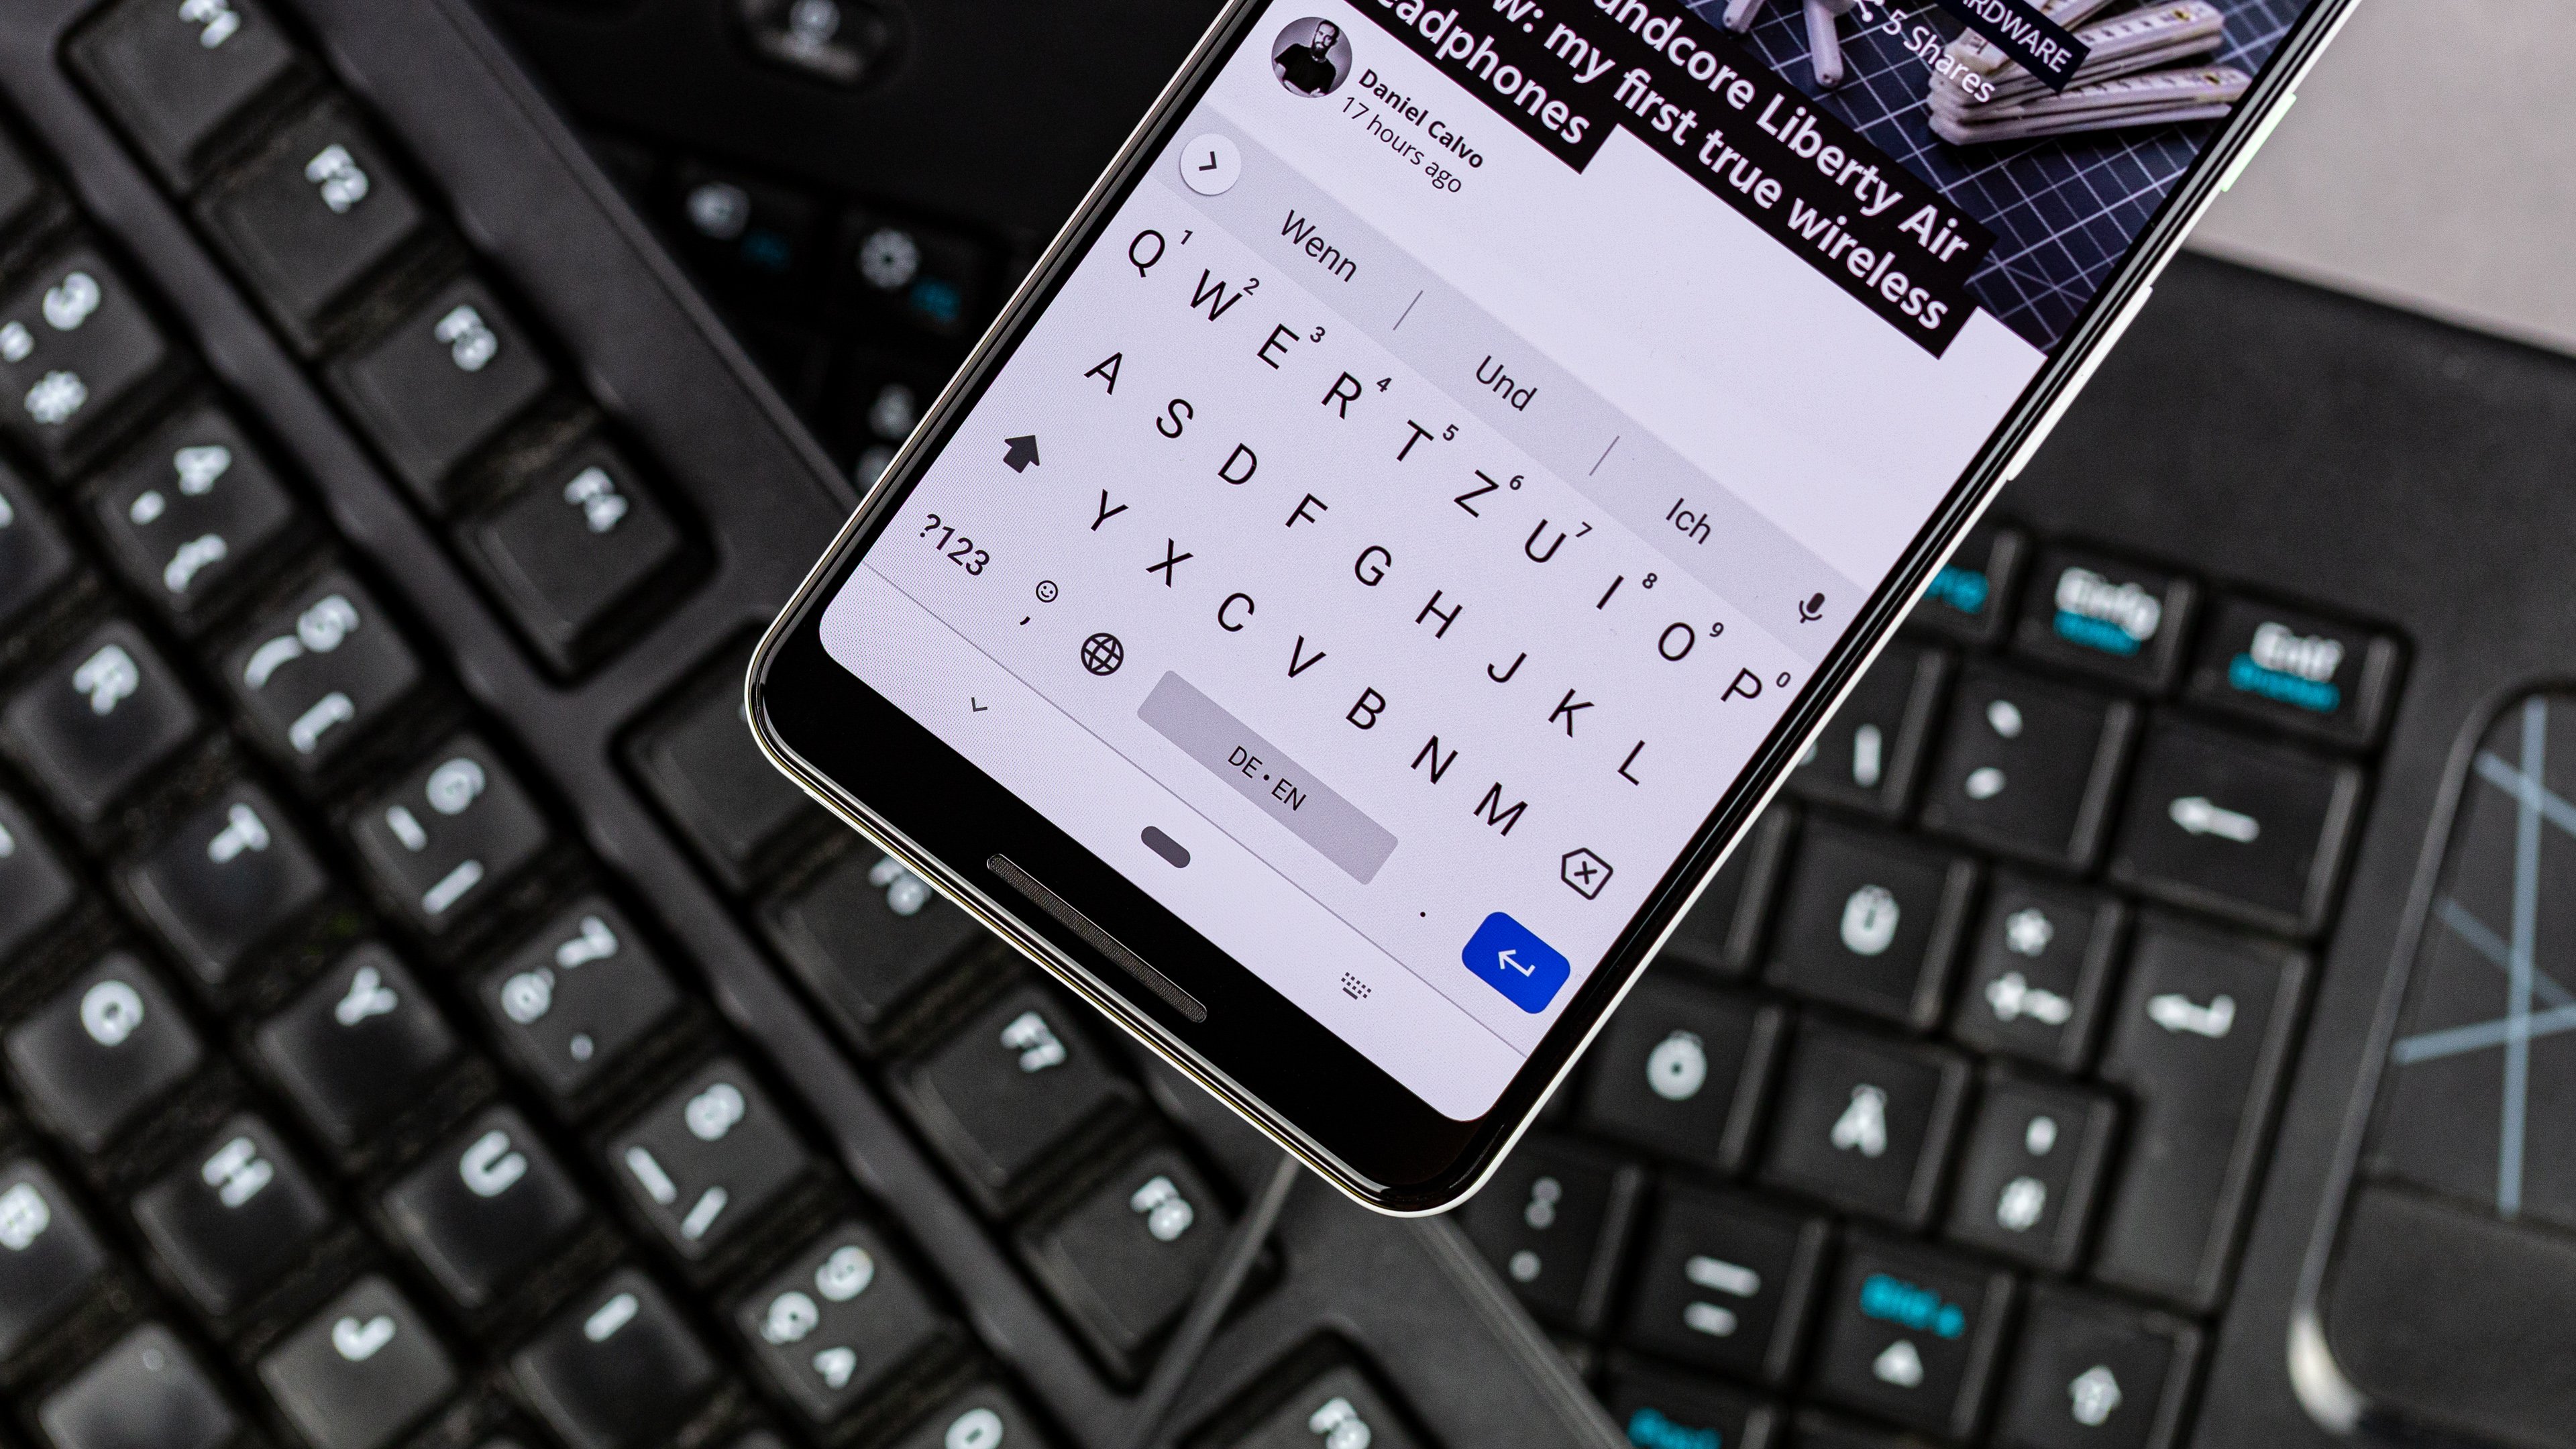 How To Make A Keyboard Bigger On Android